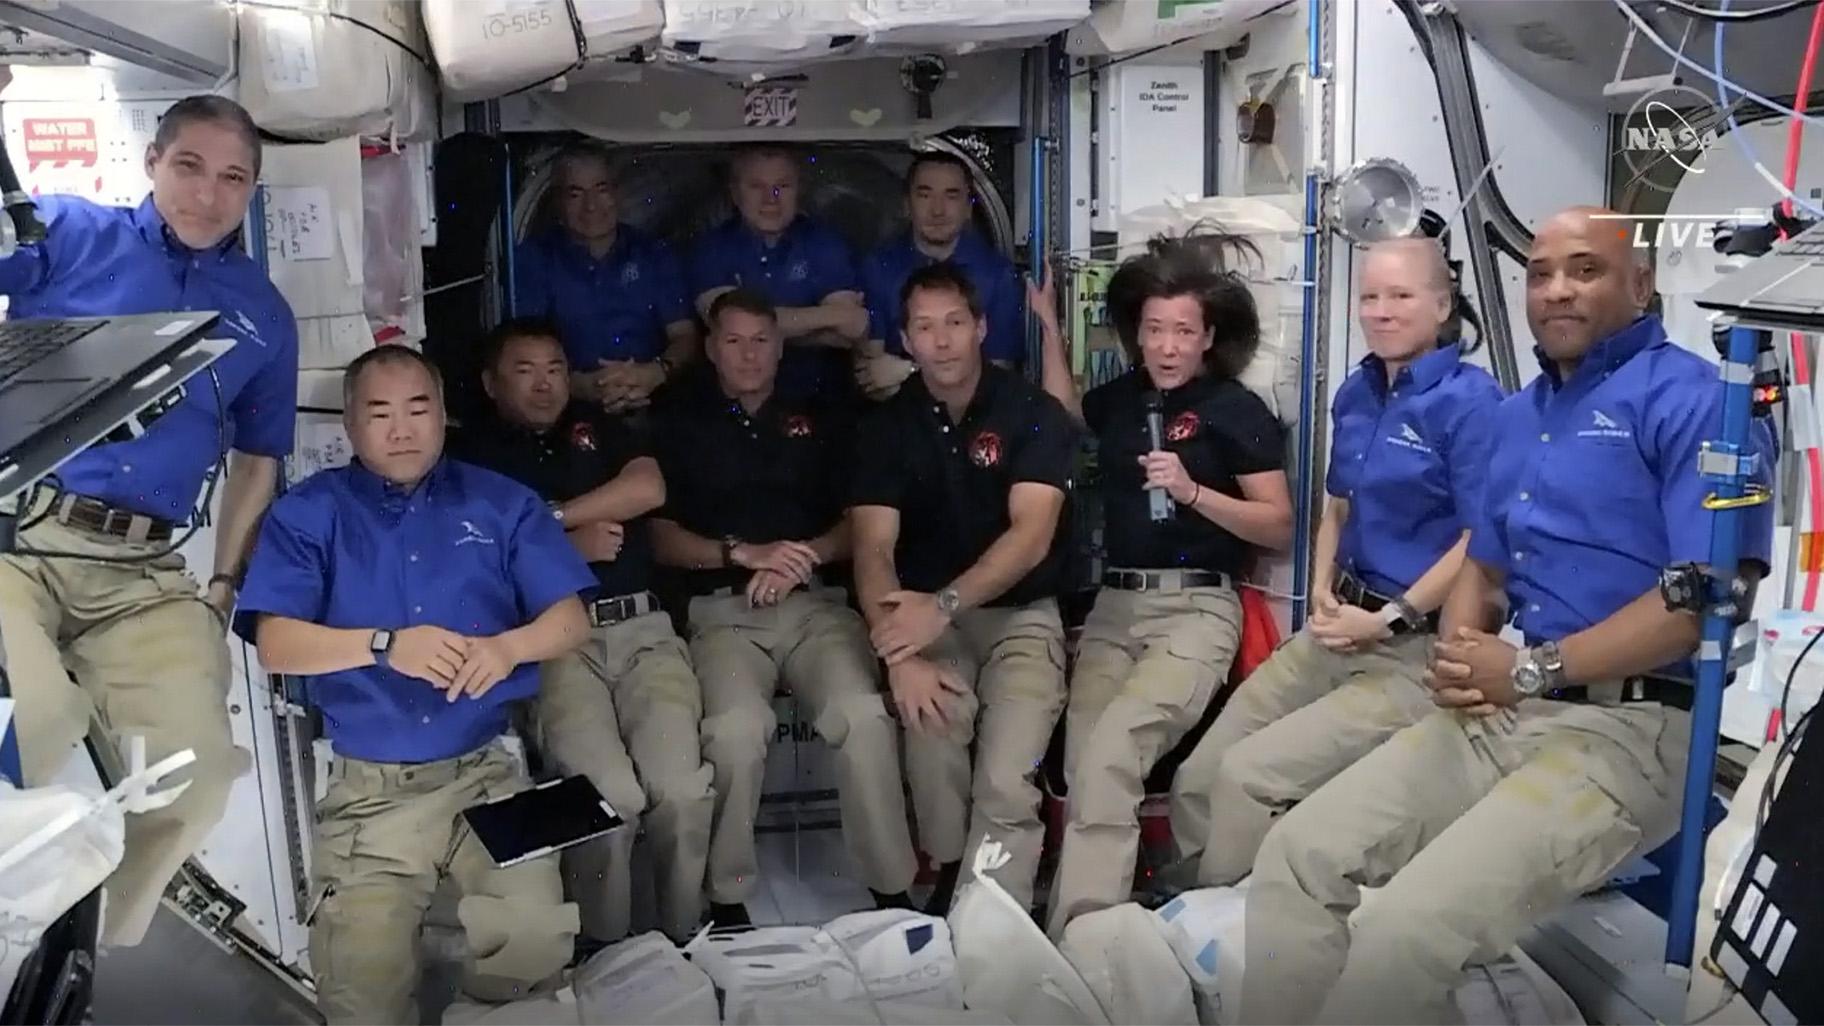 This image provided by NASA, astronauts from SpaceX join the astronauts of the International Space Station for an interview on Saturday, April 24, 2021. A recycled SpaceX capsule carrying four astronauts has arrived at the International Space Station, a day after launching from Florida. The Dragon capsule docked autonomously with the orbiting outpost on Saturday. (NASA via AP)